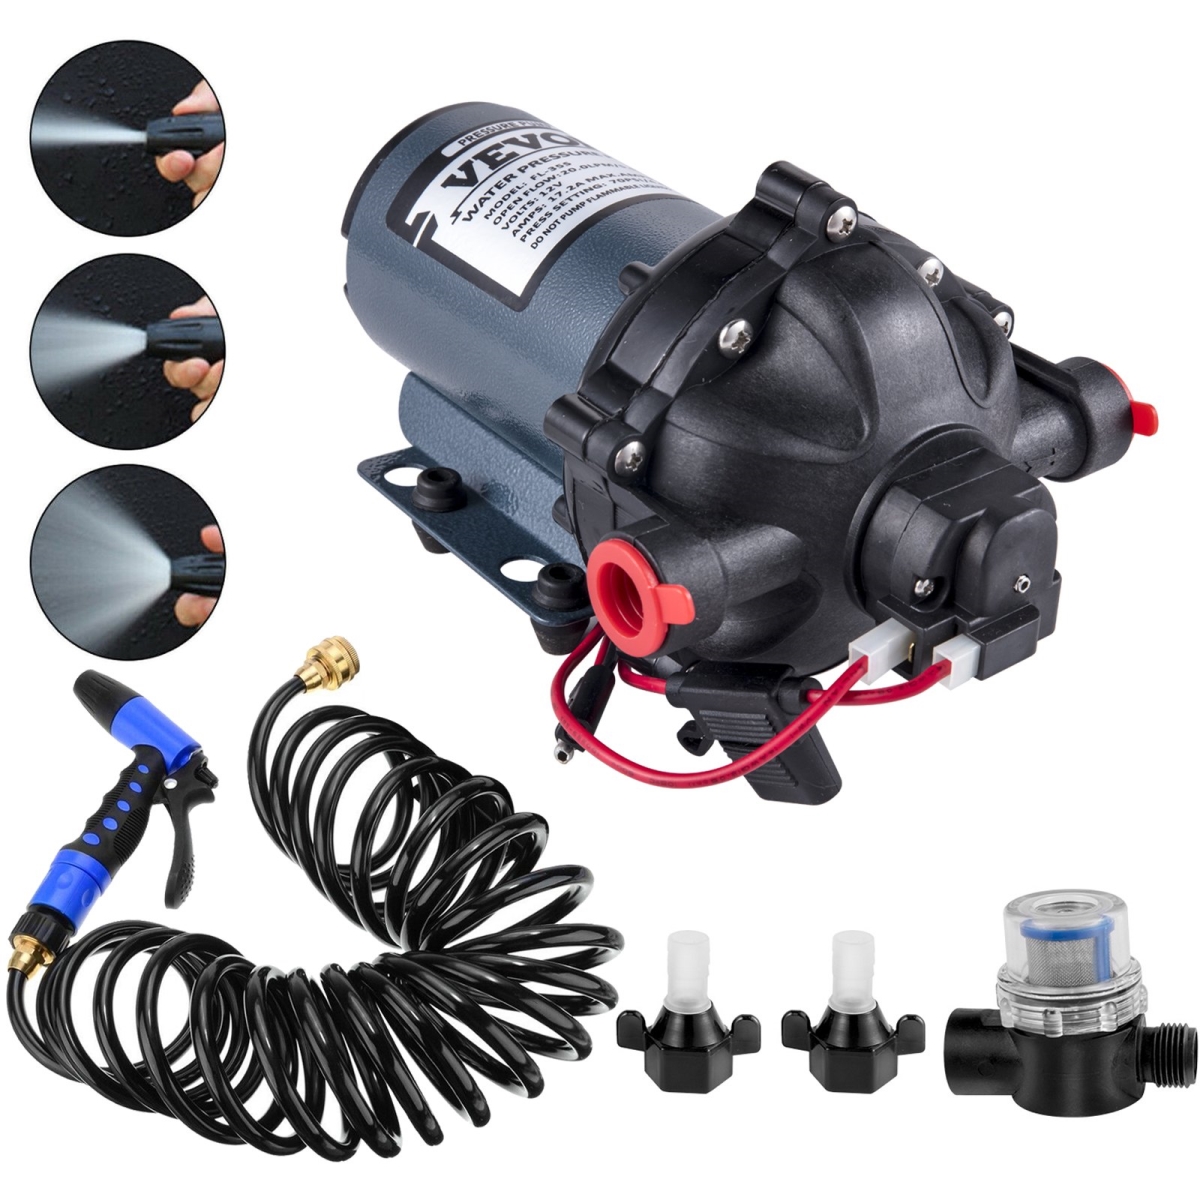 Picture of Vevor 12VDCSFWP1-JBCXB1V0 5.3 GPM 5.5 gal per Minute 12V Water Pump